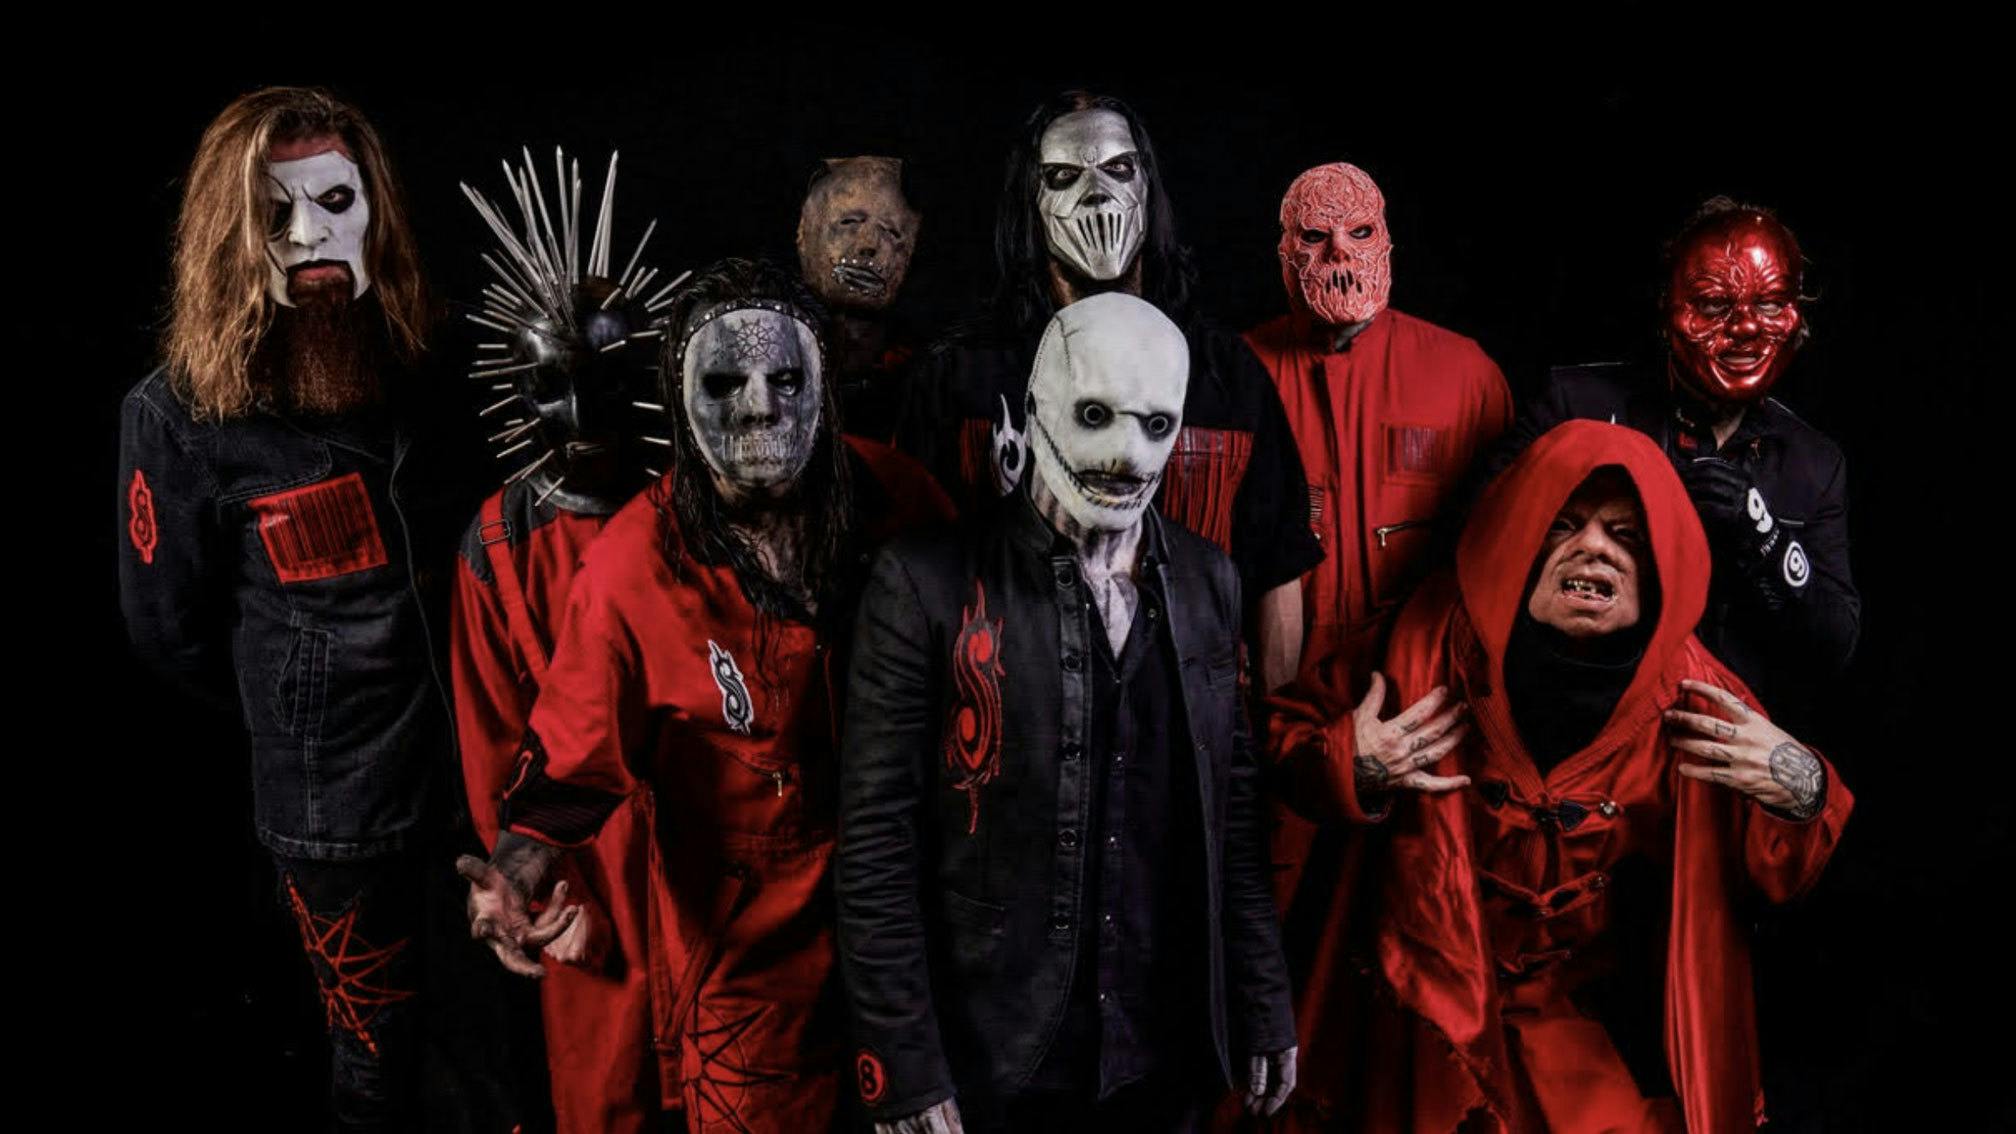 Slipknot announce two-leg Knotfest Roadshow tour featuring In This Moment, Jinjer, Cypress Hill and Ho99o9